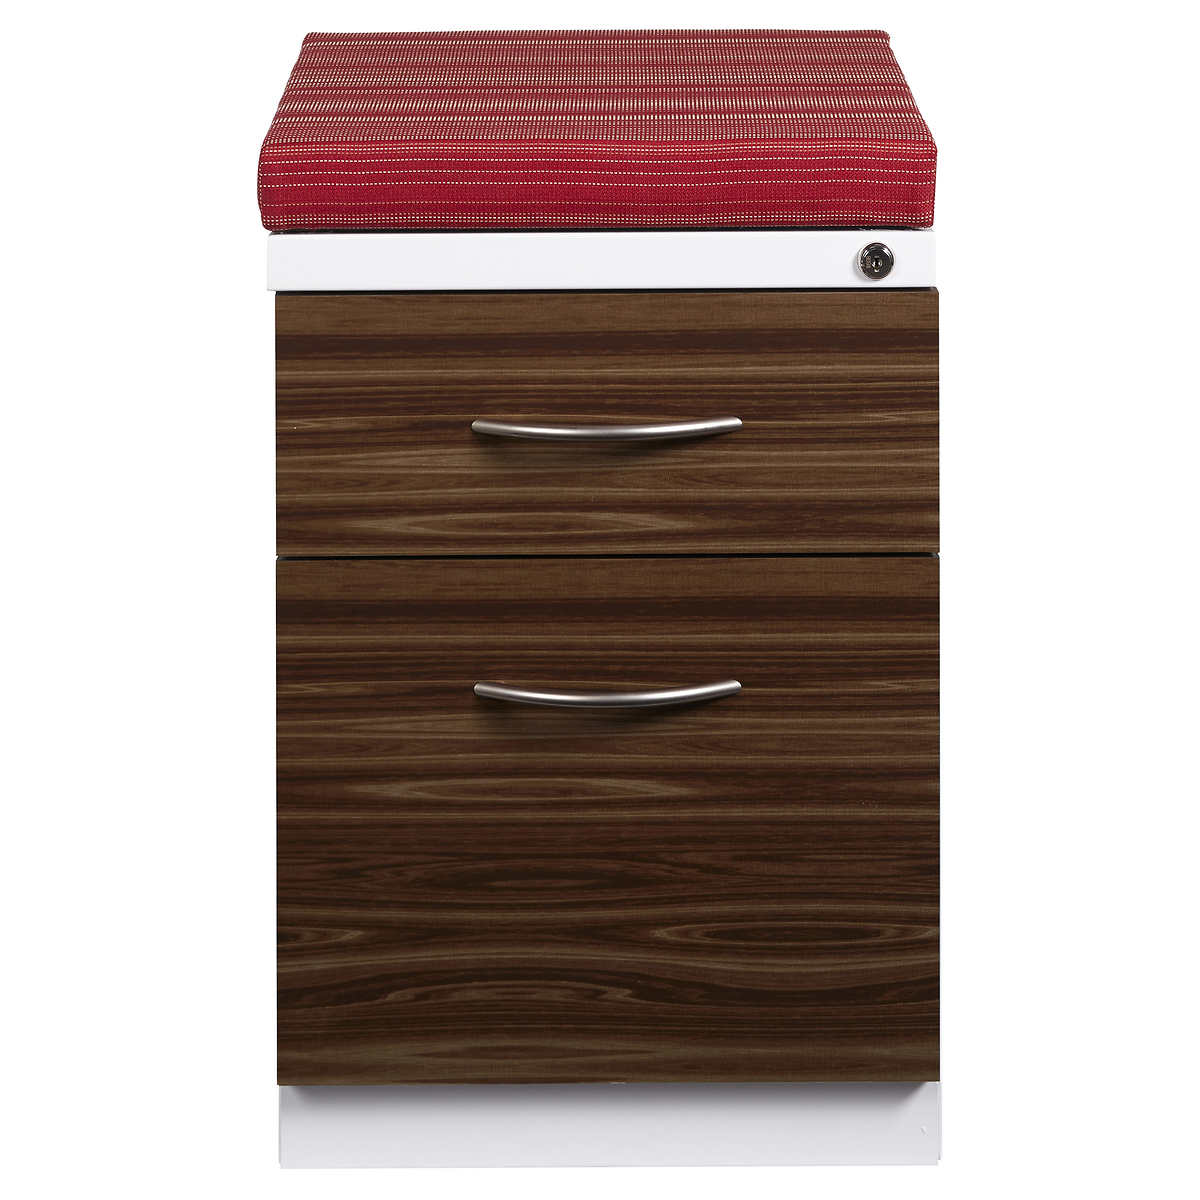 Hirsh Industries Mobile 2 Drawer File Cabinet Pedestal With Wood Front Red Seat Cushion